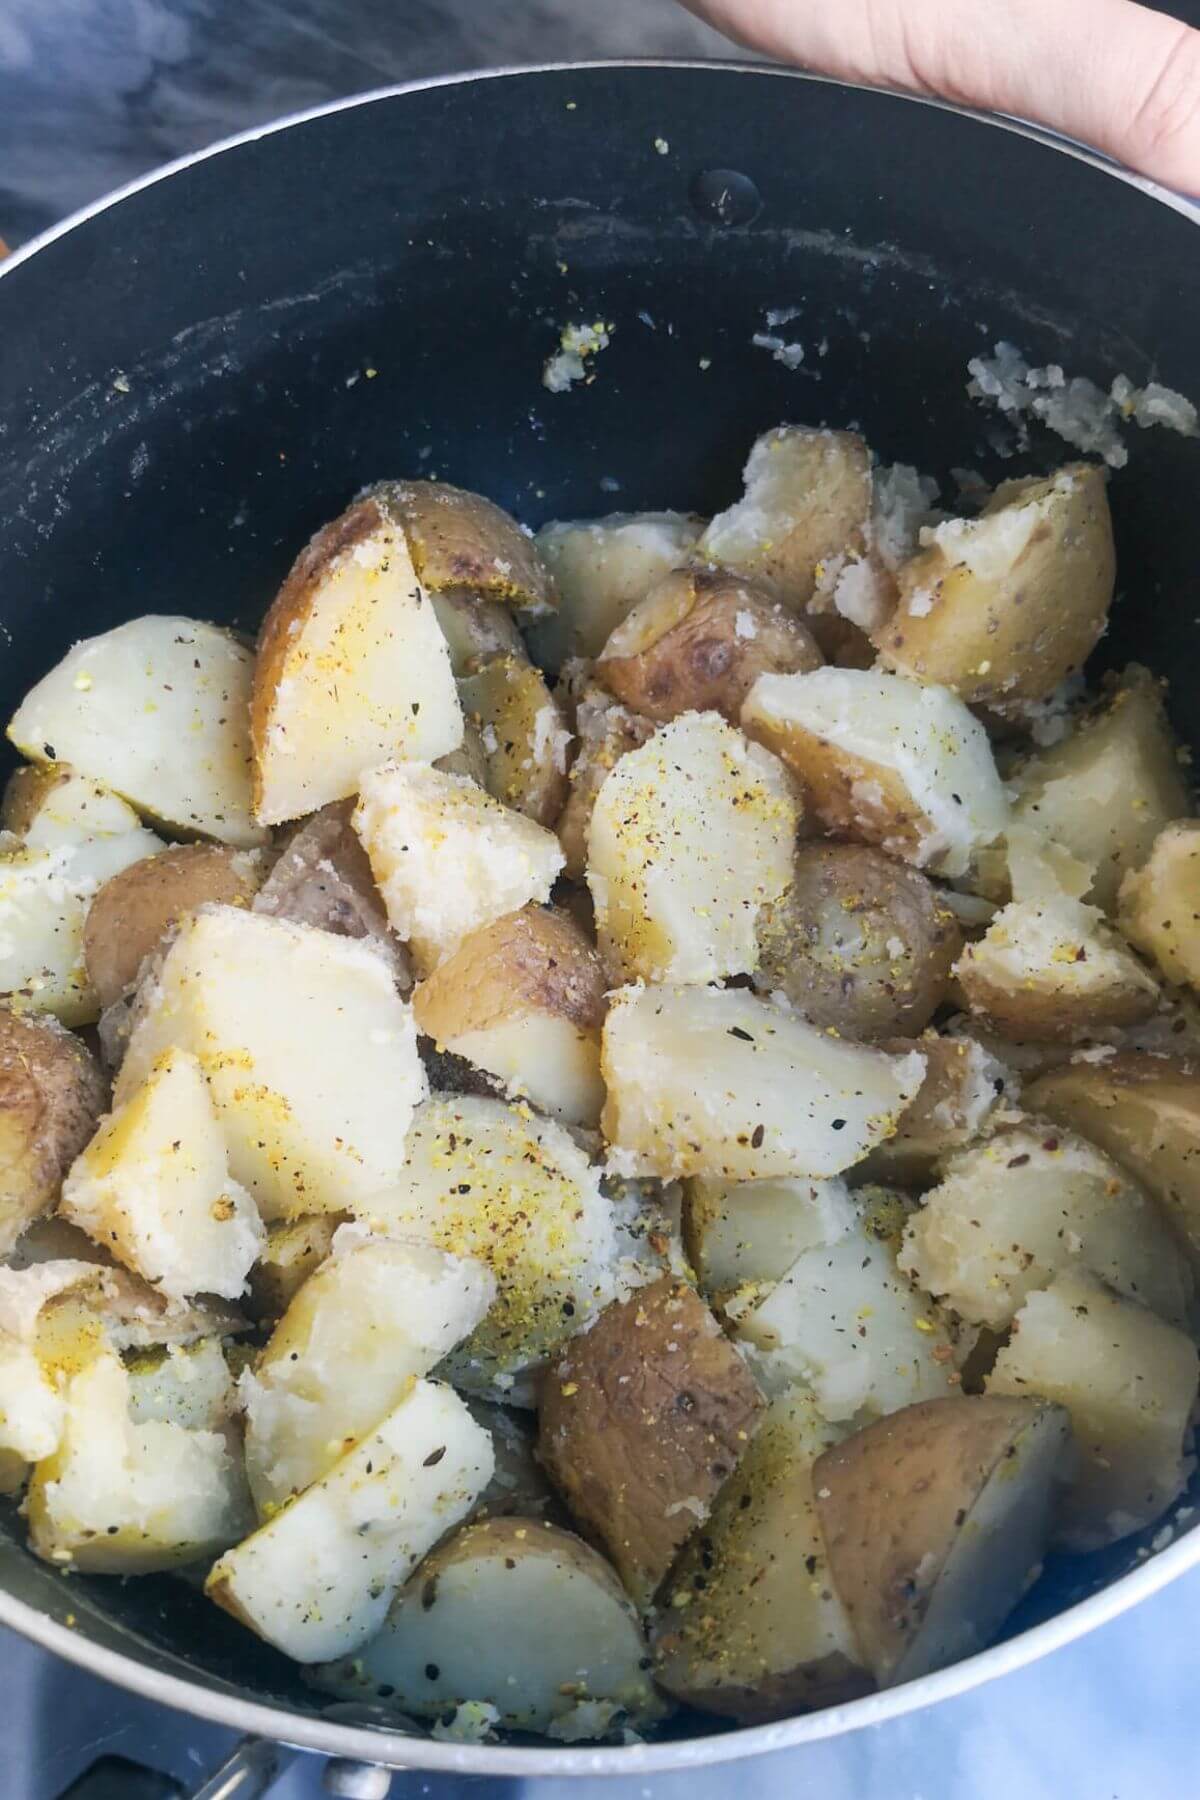 Fluffed up chopped potatoes in a black pot with dukkah tossed through.